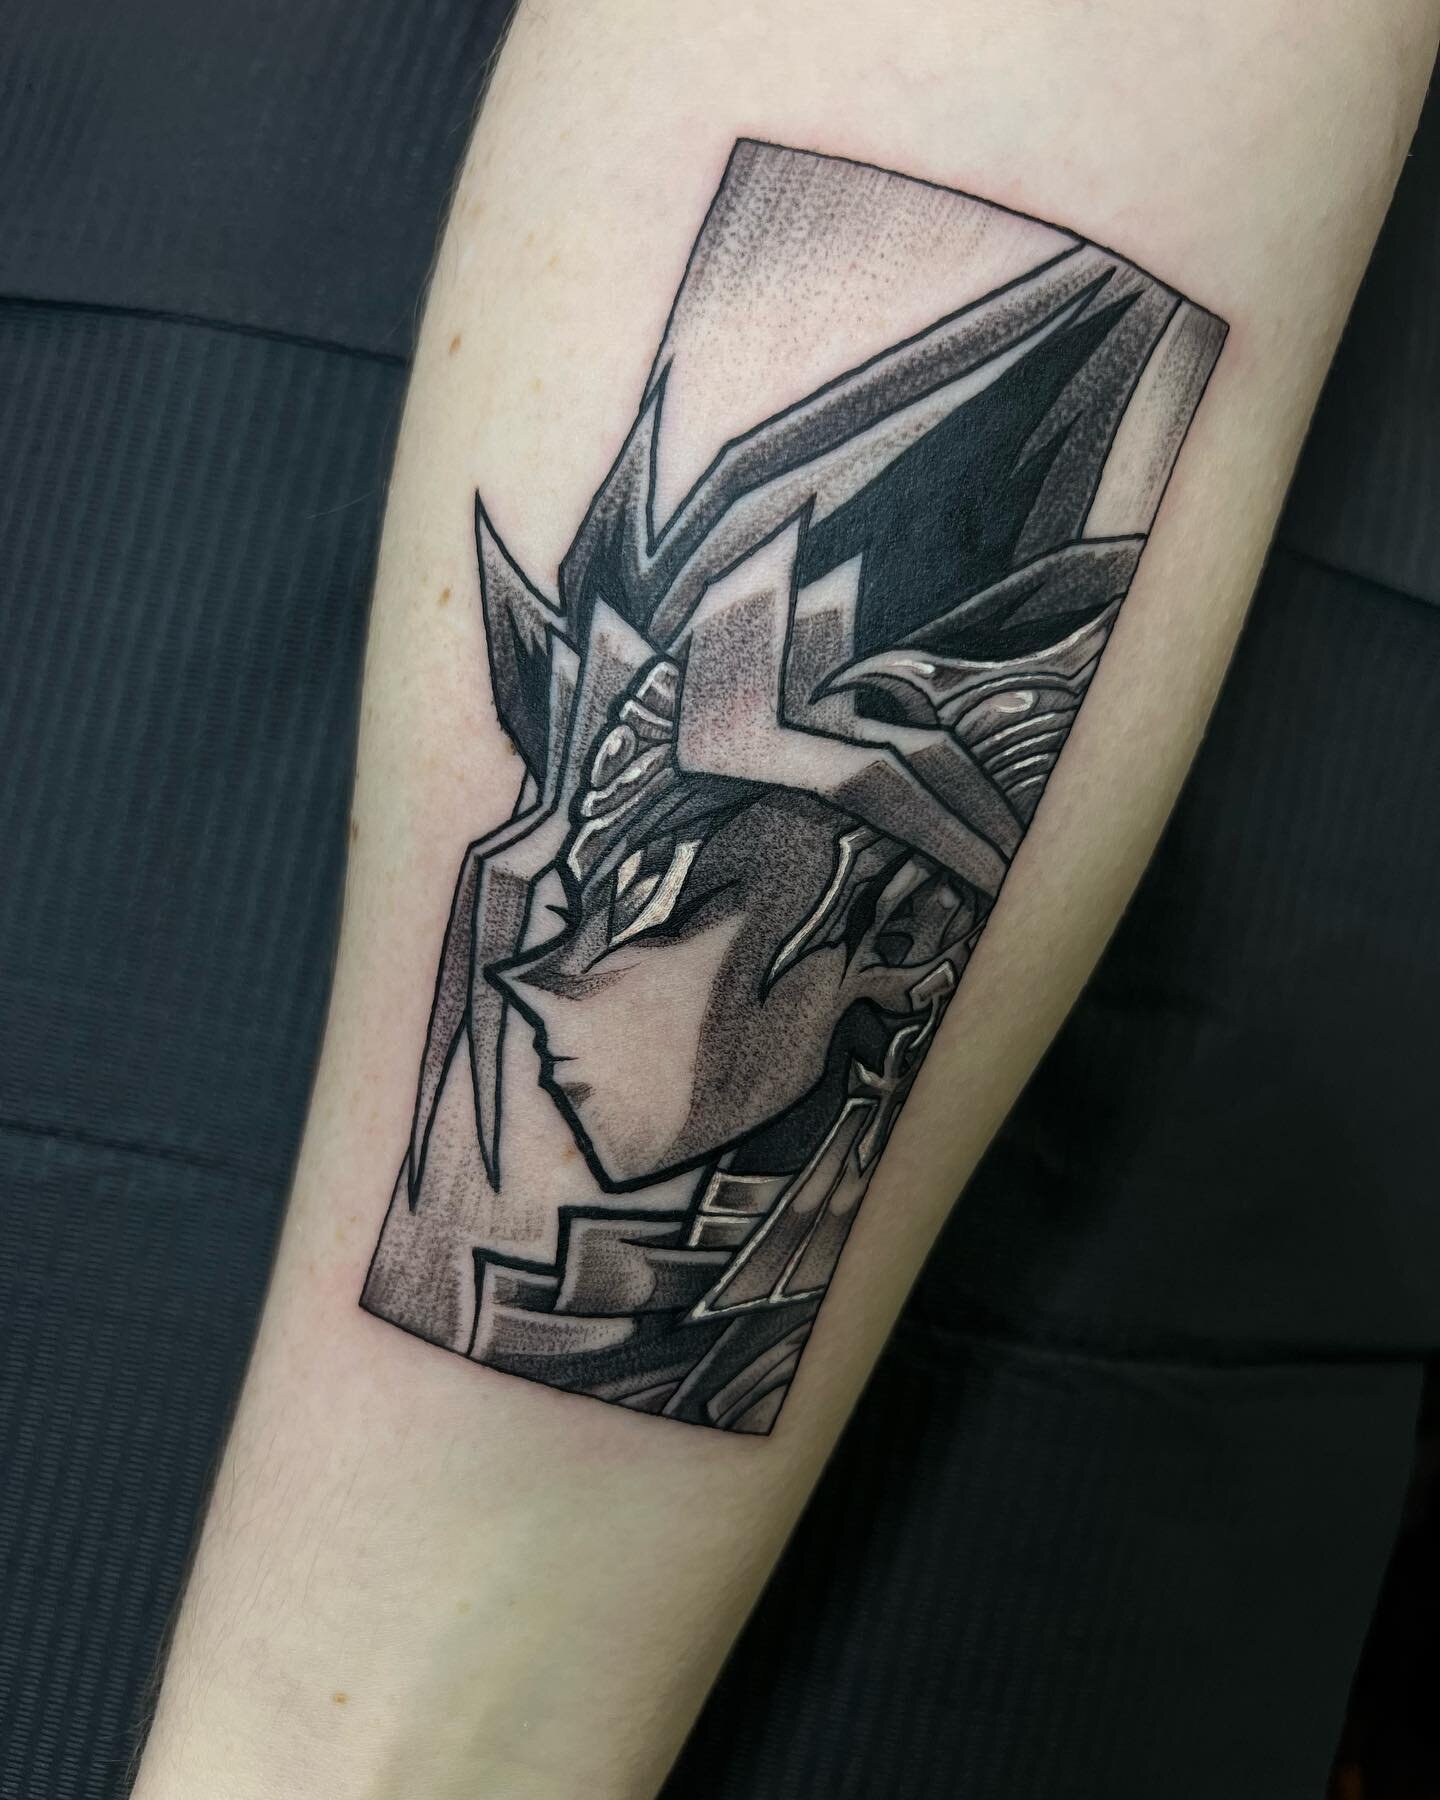 💥Yu-Gi-Yo💥
Thank you everyone who stopped by the convention couldn&rsquo;t do this without y&rsquo;all
&bull;
&bull;
&bull;
#anime #anmietattoo #yugioh #yugiohtattoo #manga #mangapaneltattoo #blackwork #blackworktattoo #chicago #chicagotattooartist